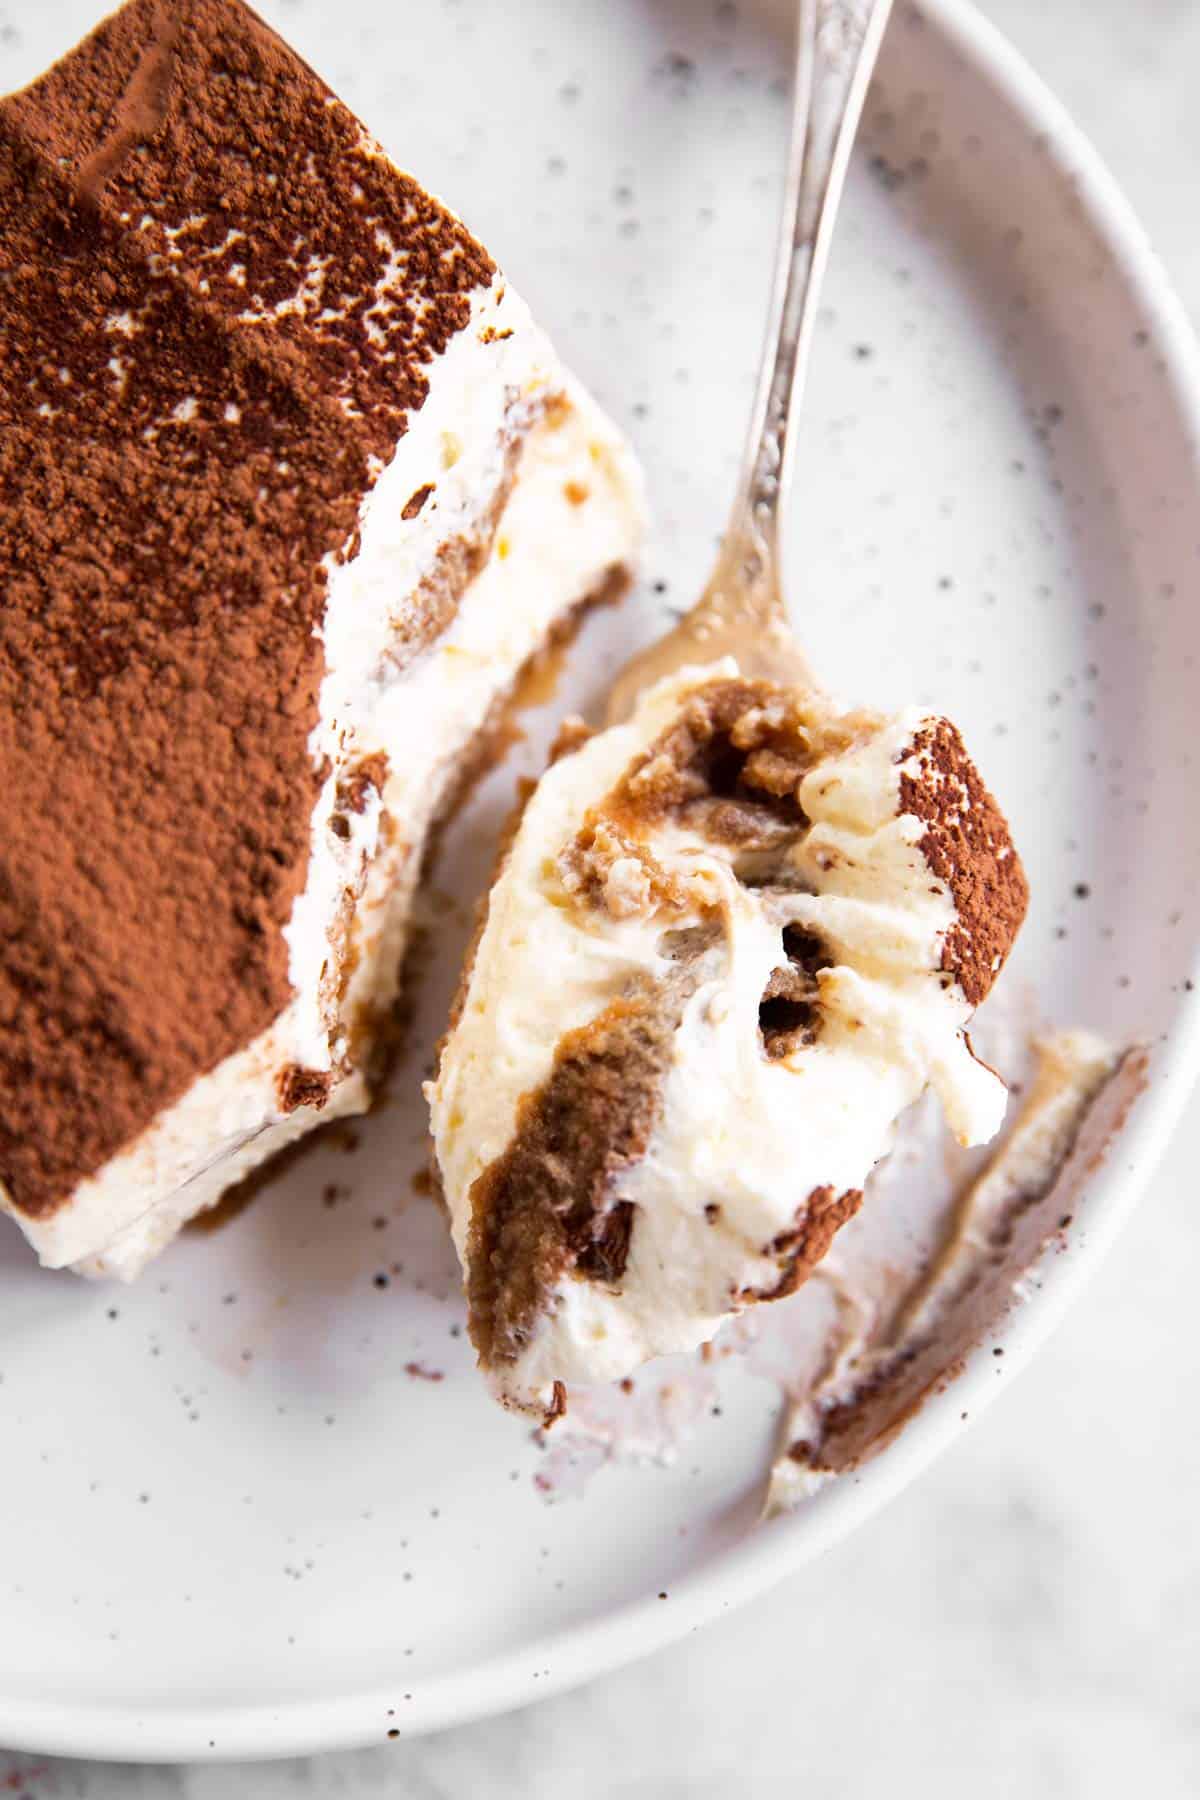 overhead view of slice of Tiramisu with fork having bite taken out on plate